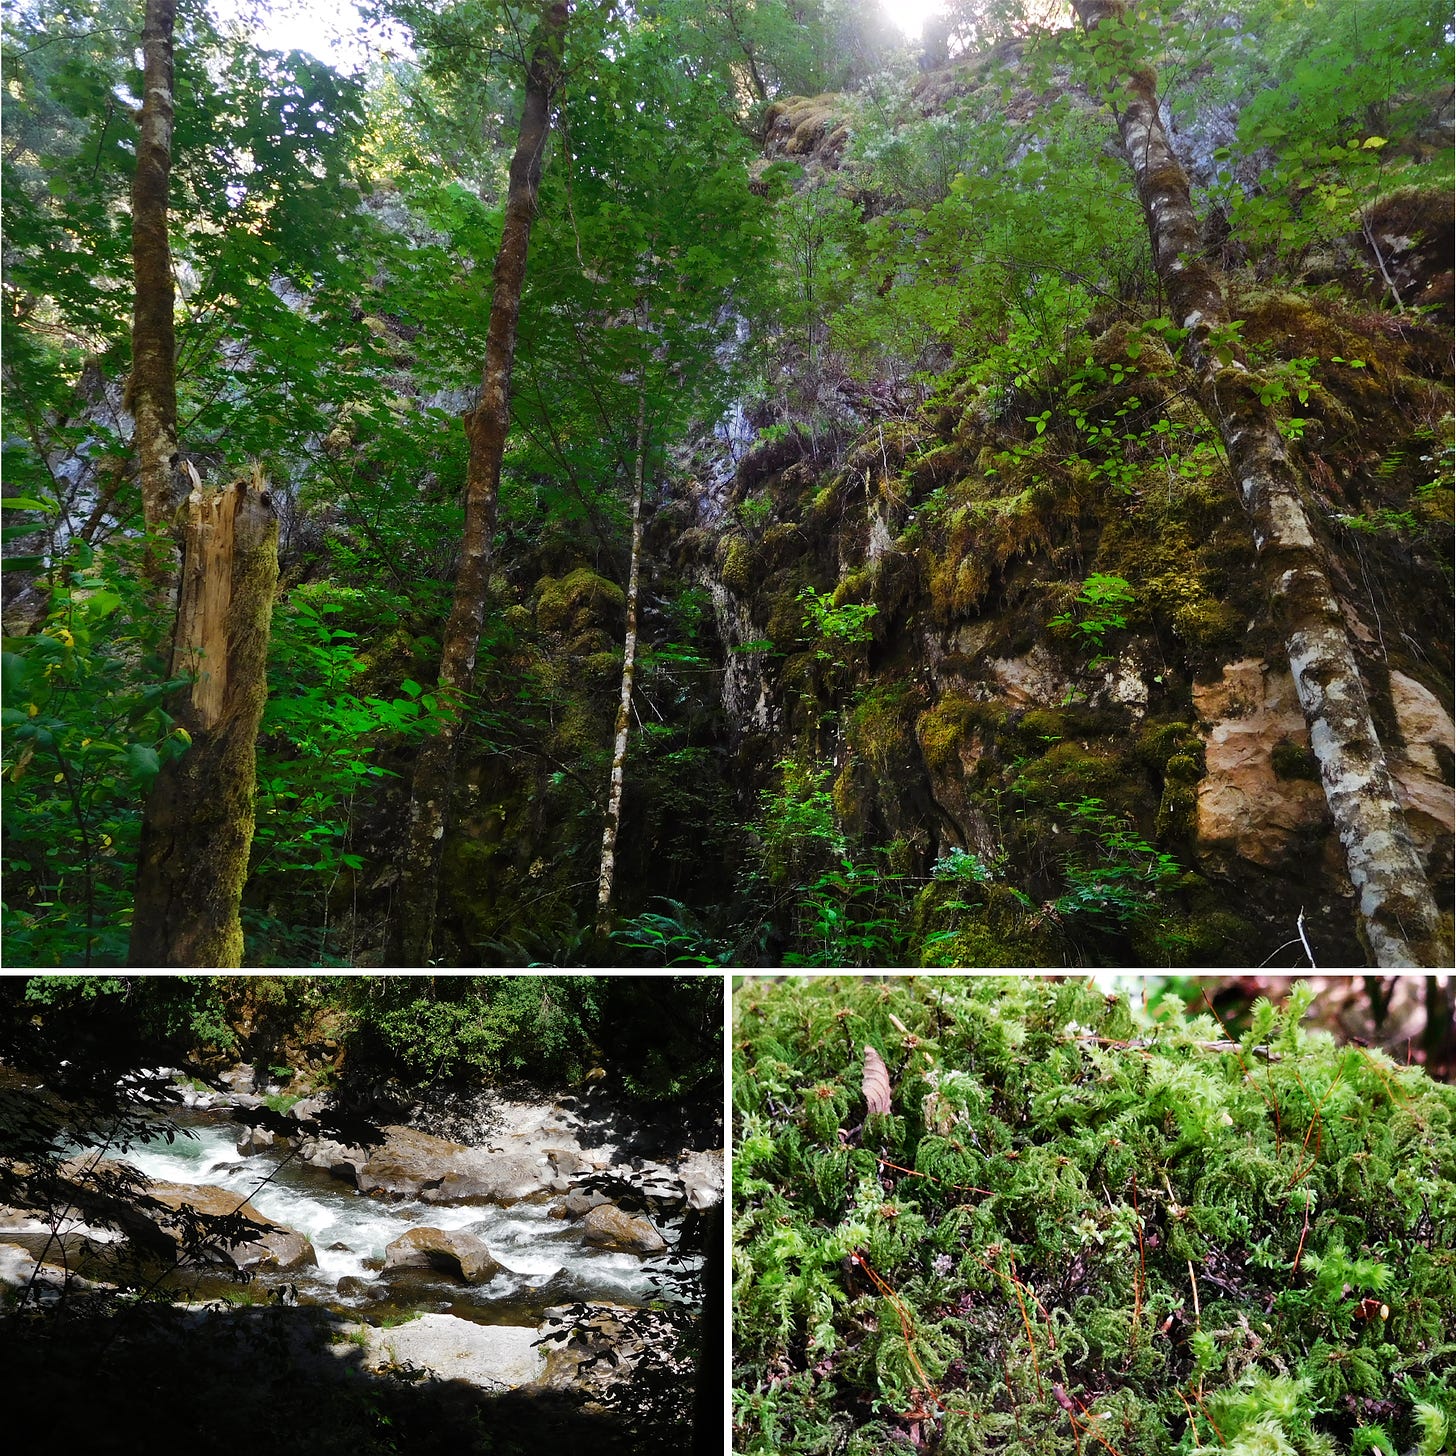 Montage of trees in in front of high bluff, whitewater glimpsed between leaves; close-up of branching moss.